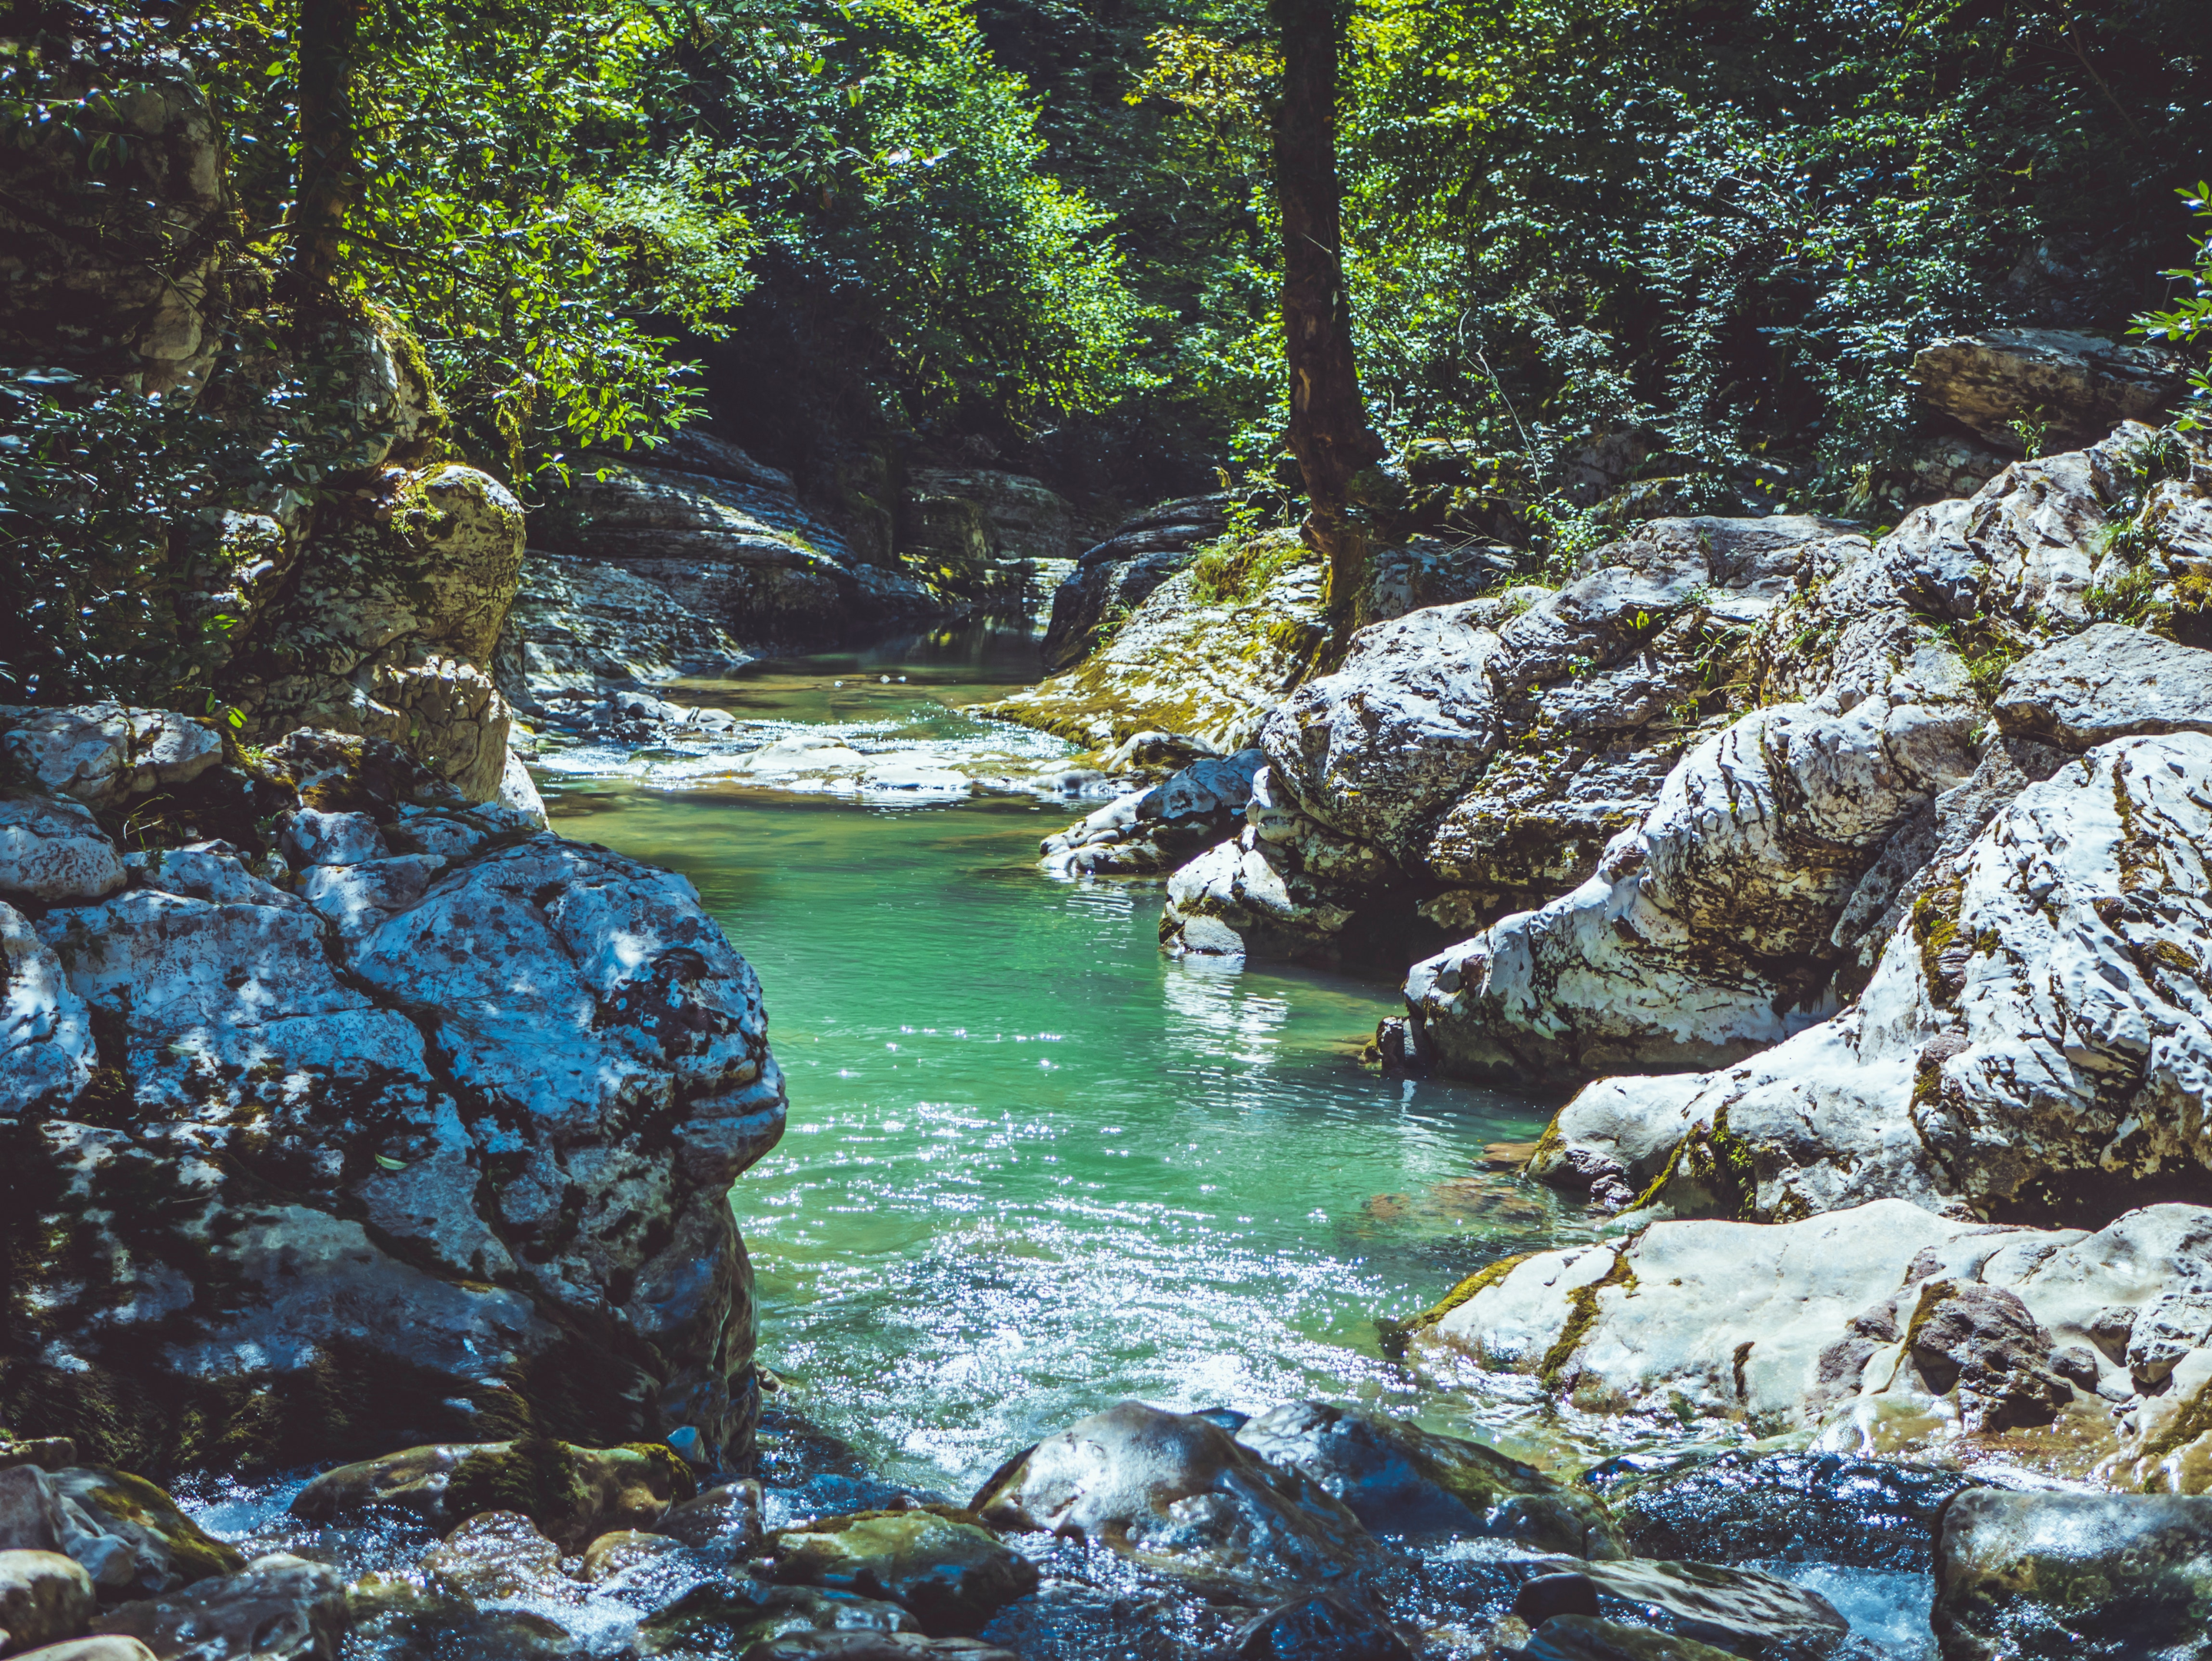 spring water surrounded by rocks and trees